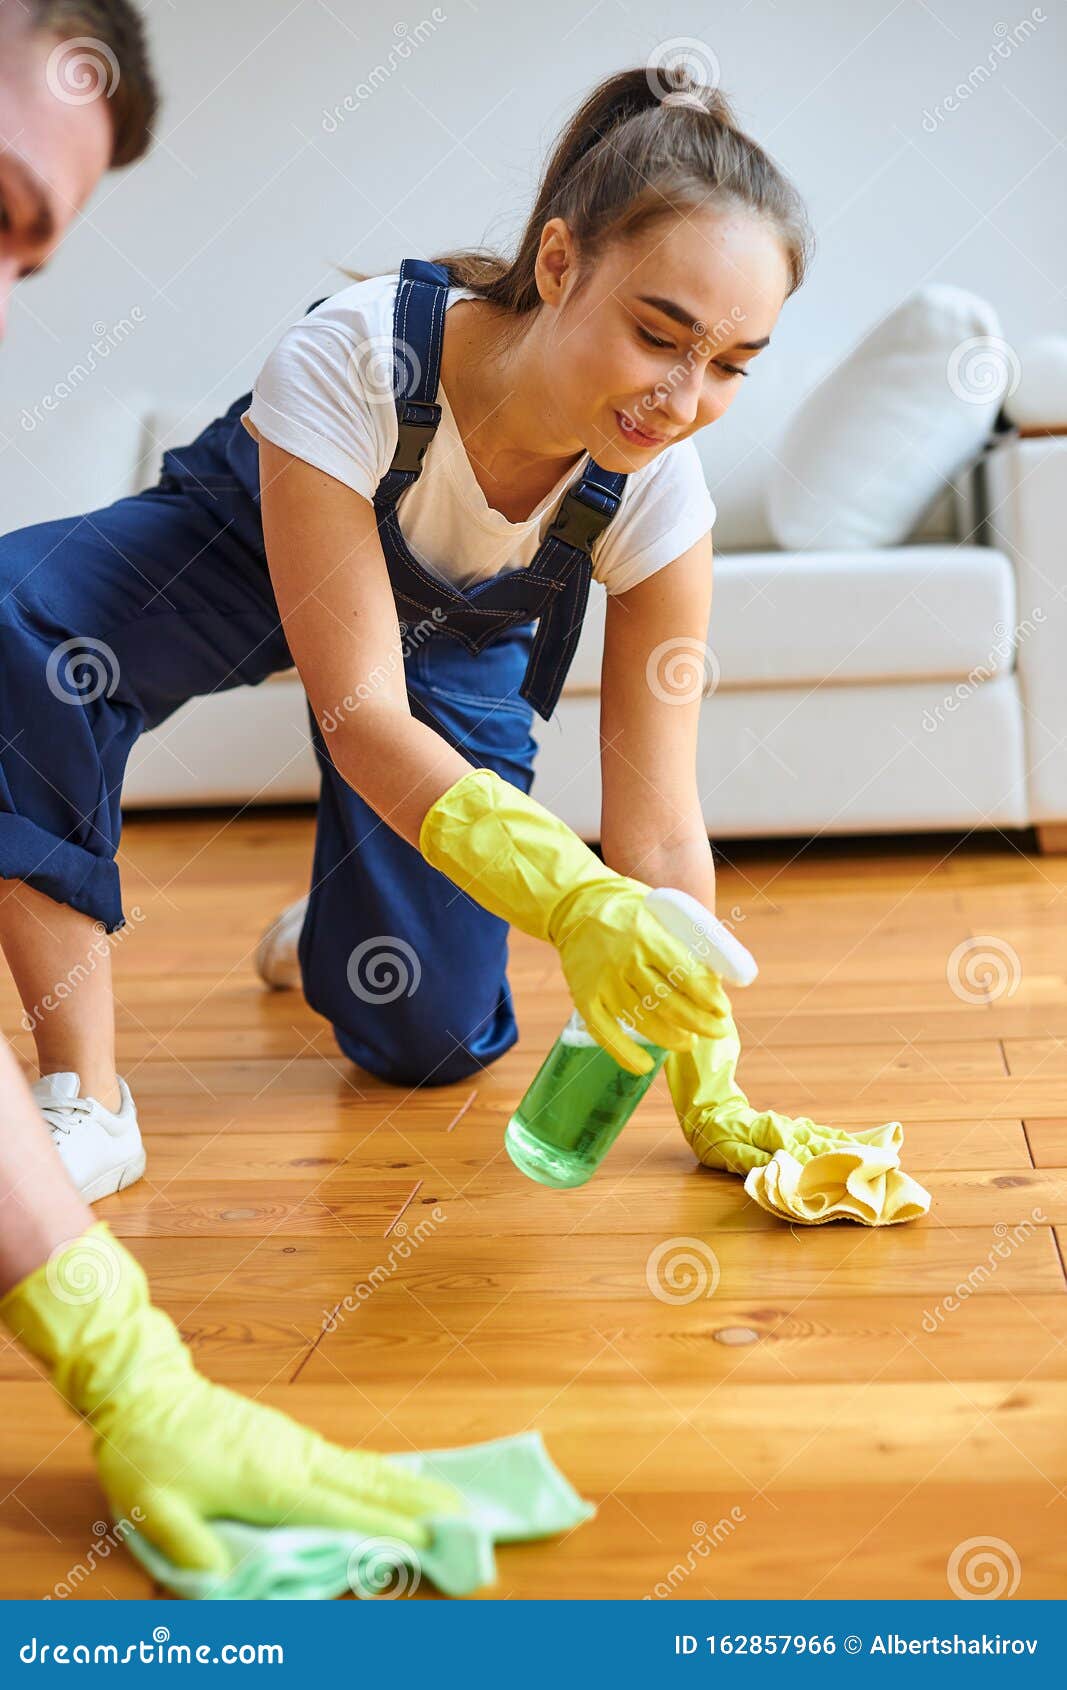 Positive Female Cleaner Polishing Floor With Rag And Spray Stock